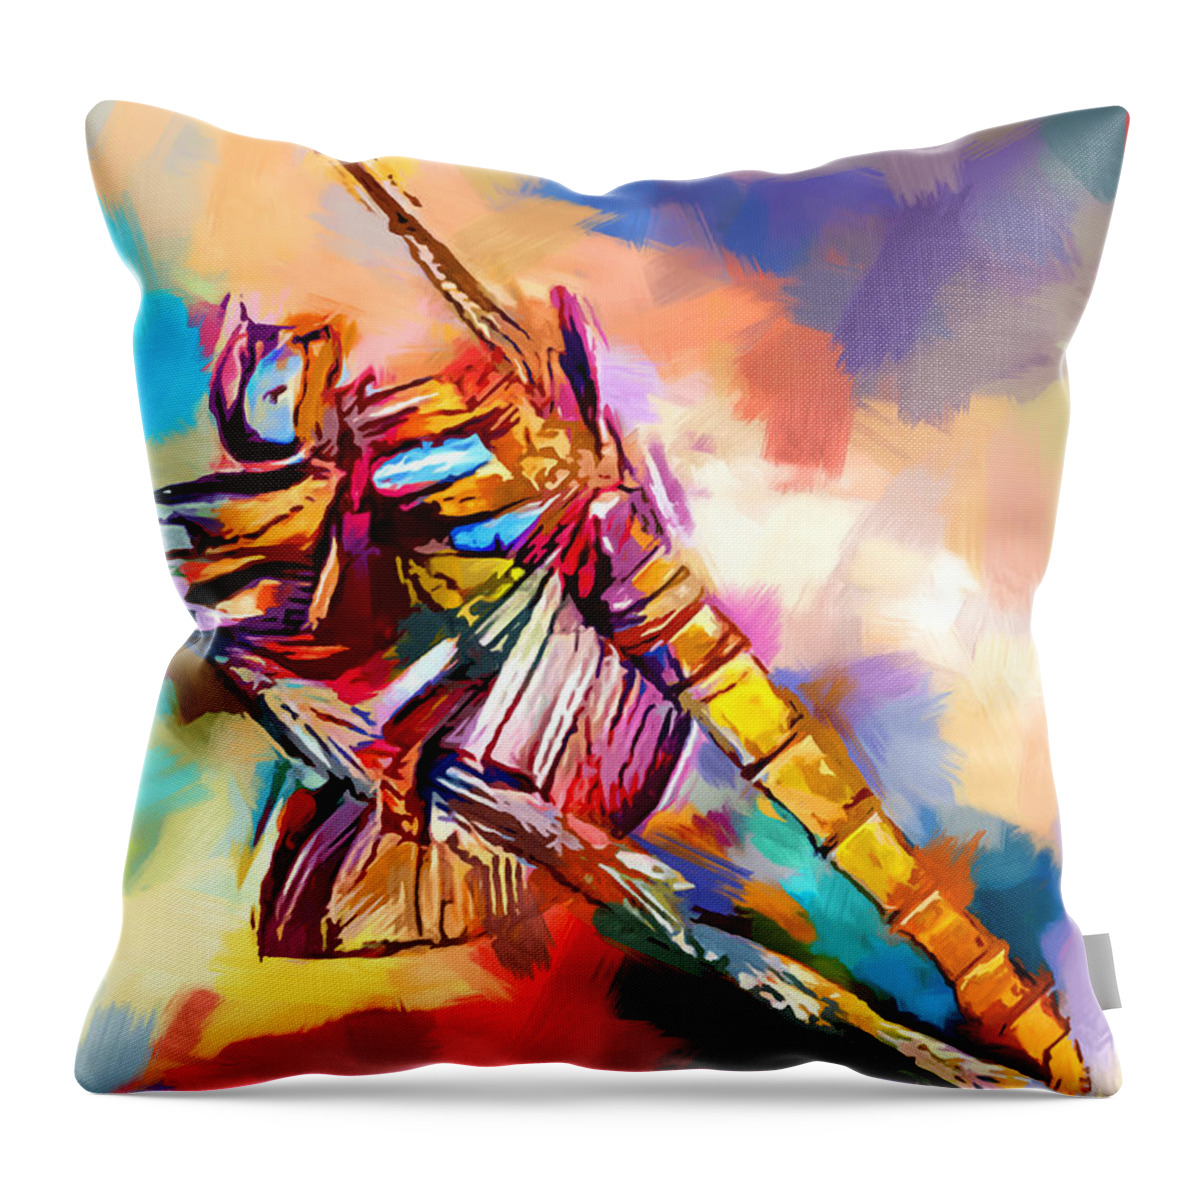 Dragonfly Throw Pillow featuring the painting Dragonfly 2 by Chris Butler